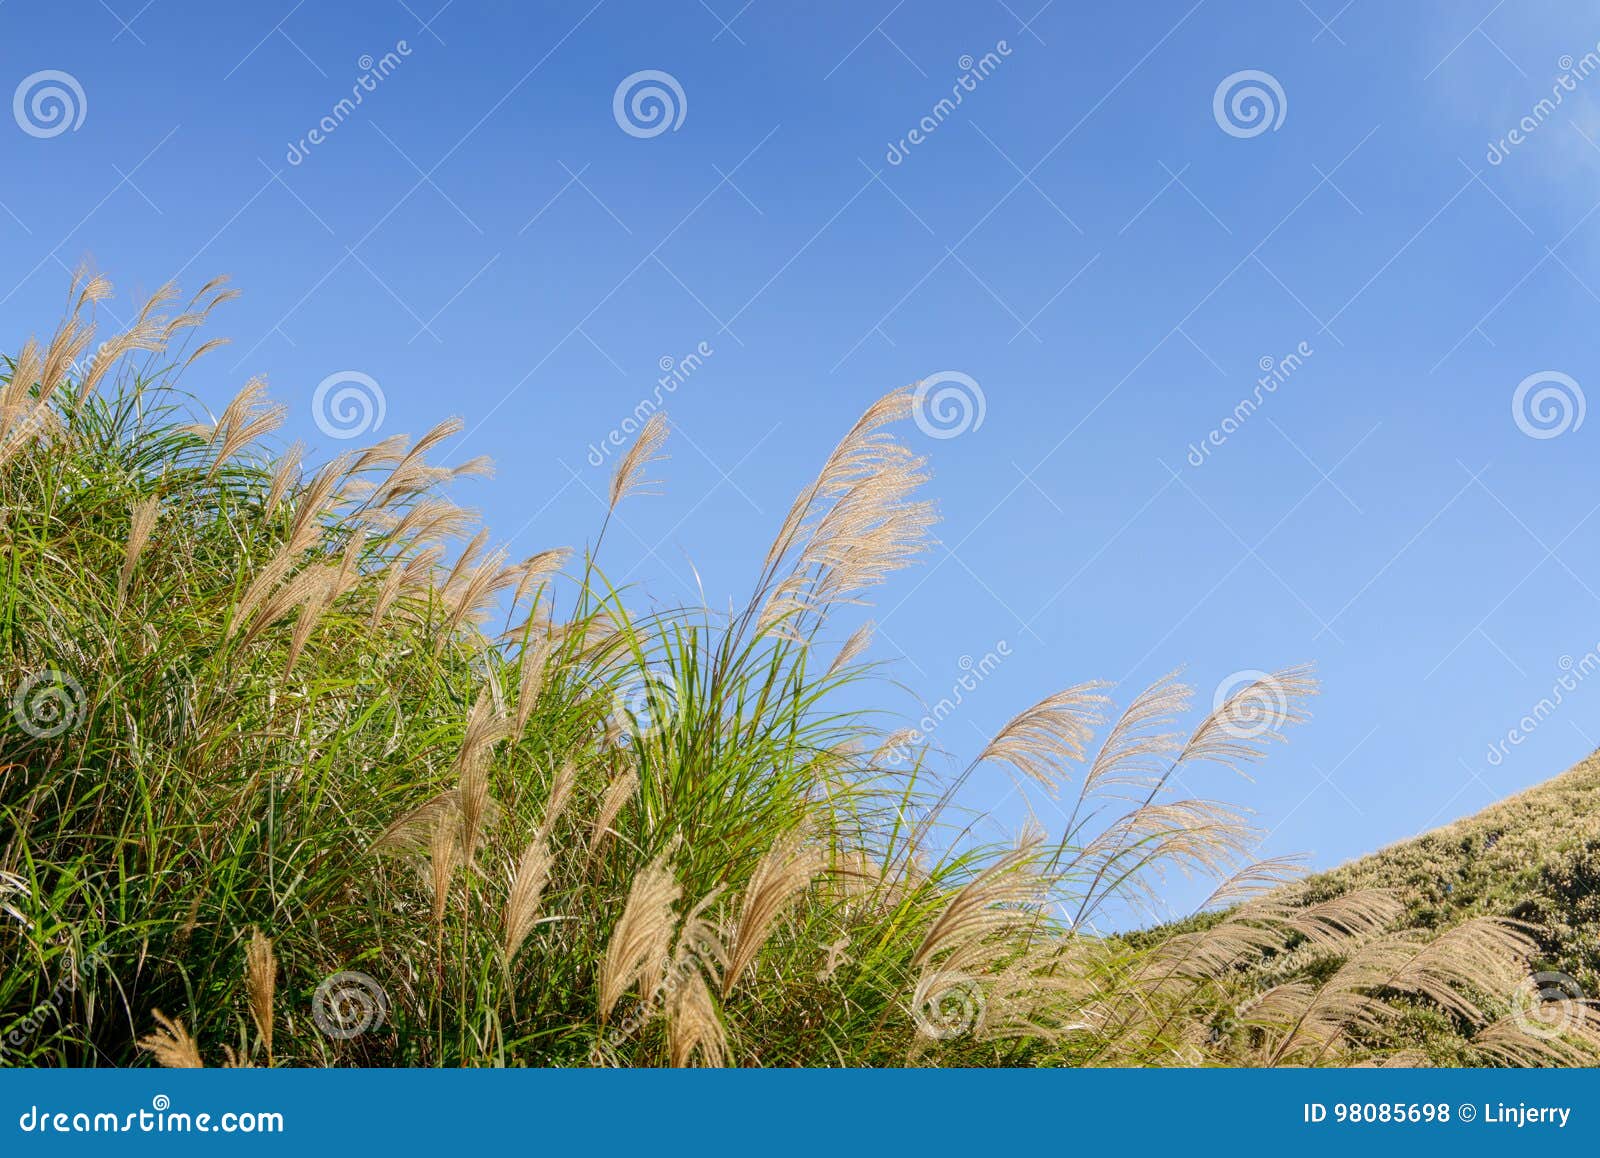 Closeup of reed flower stock photo. Image of landscape - 98085698